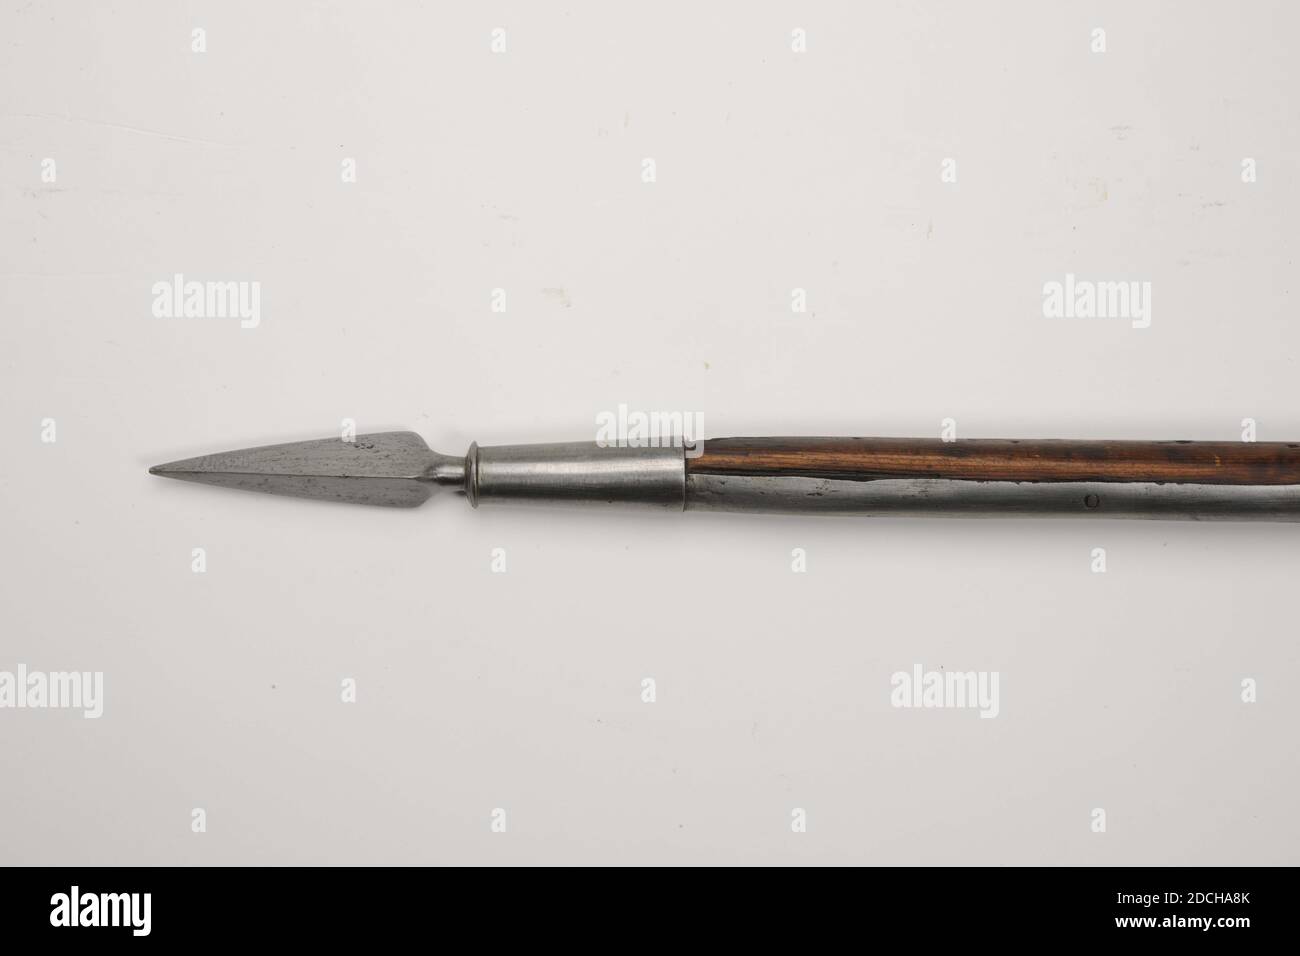 lance, Anonymous, between 1590-1600, iron, ash wood, forged, Lance of the State Army, Dimensions Catalog dimensions: 296cm, General: 295 x 8cm 2950 x 80mm Stock Photo